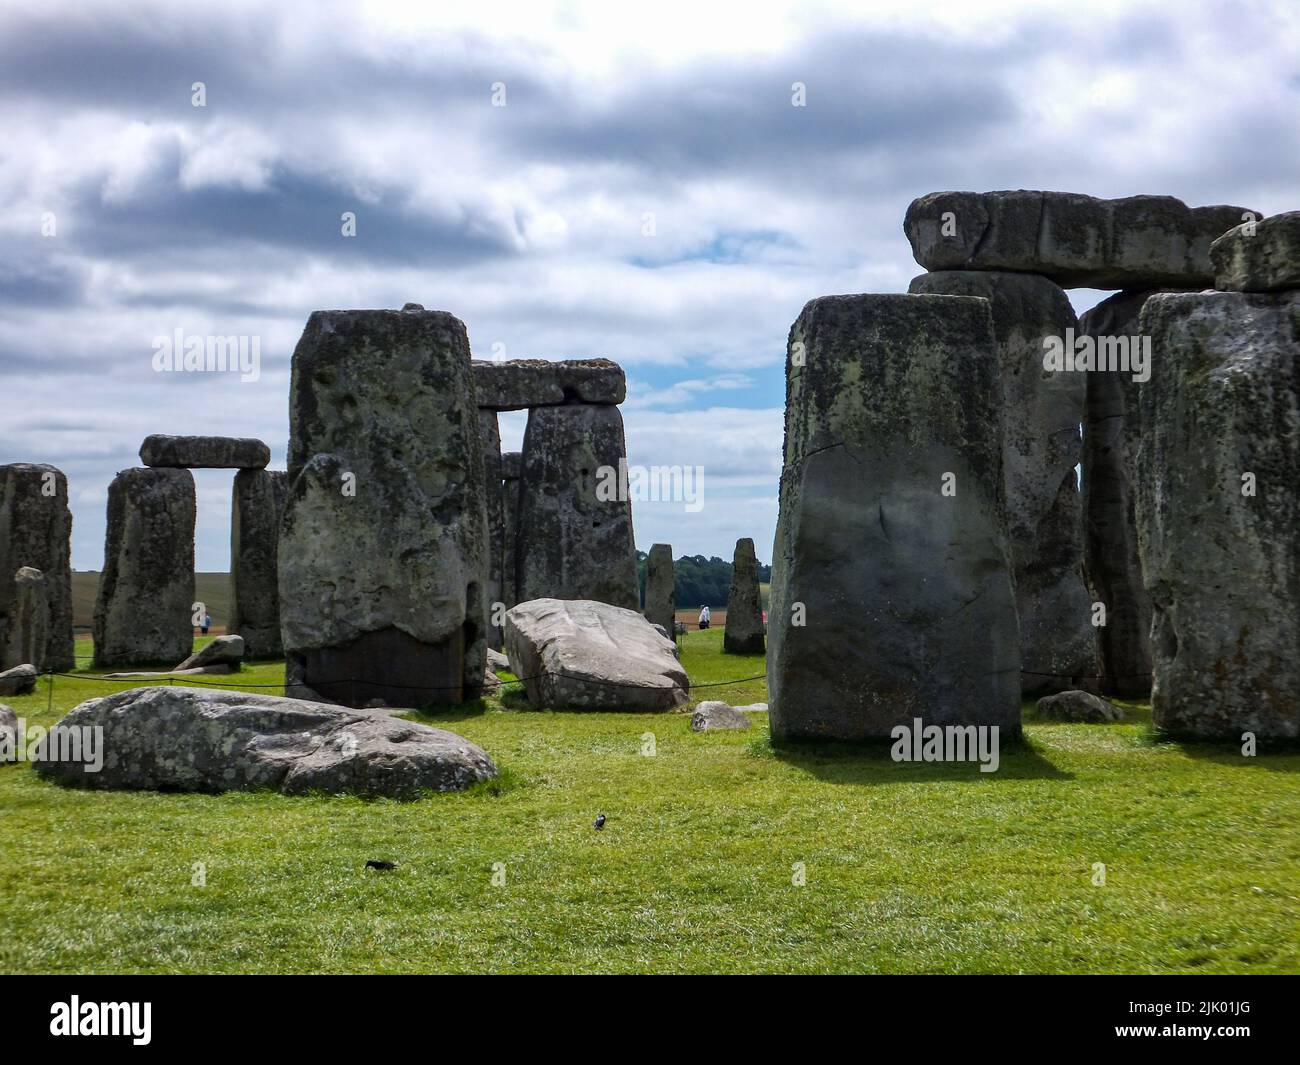 The ancient Stonehenge prehistoric monument near Amesbury in Wiltshire, England, UK is now a UNESCO World Heritage Site. Stock Photo